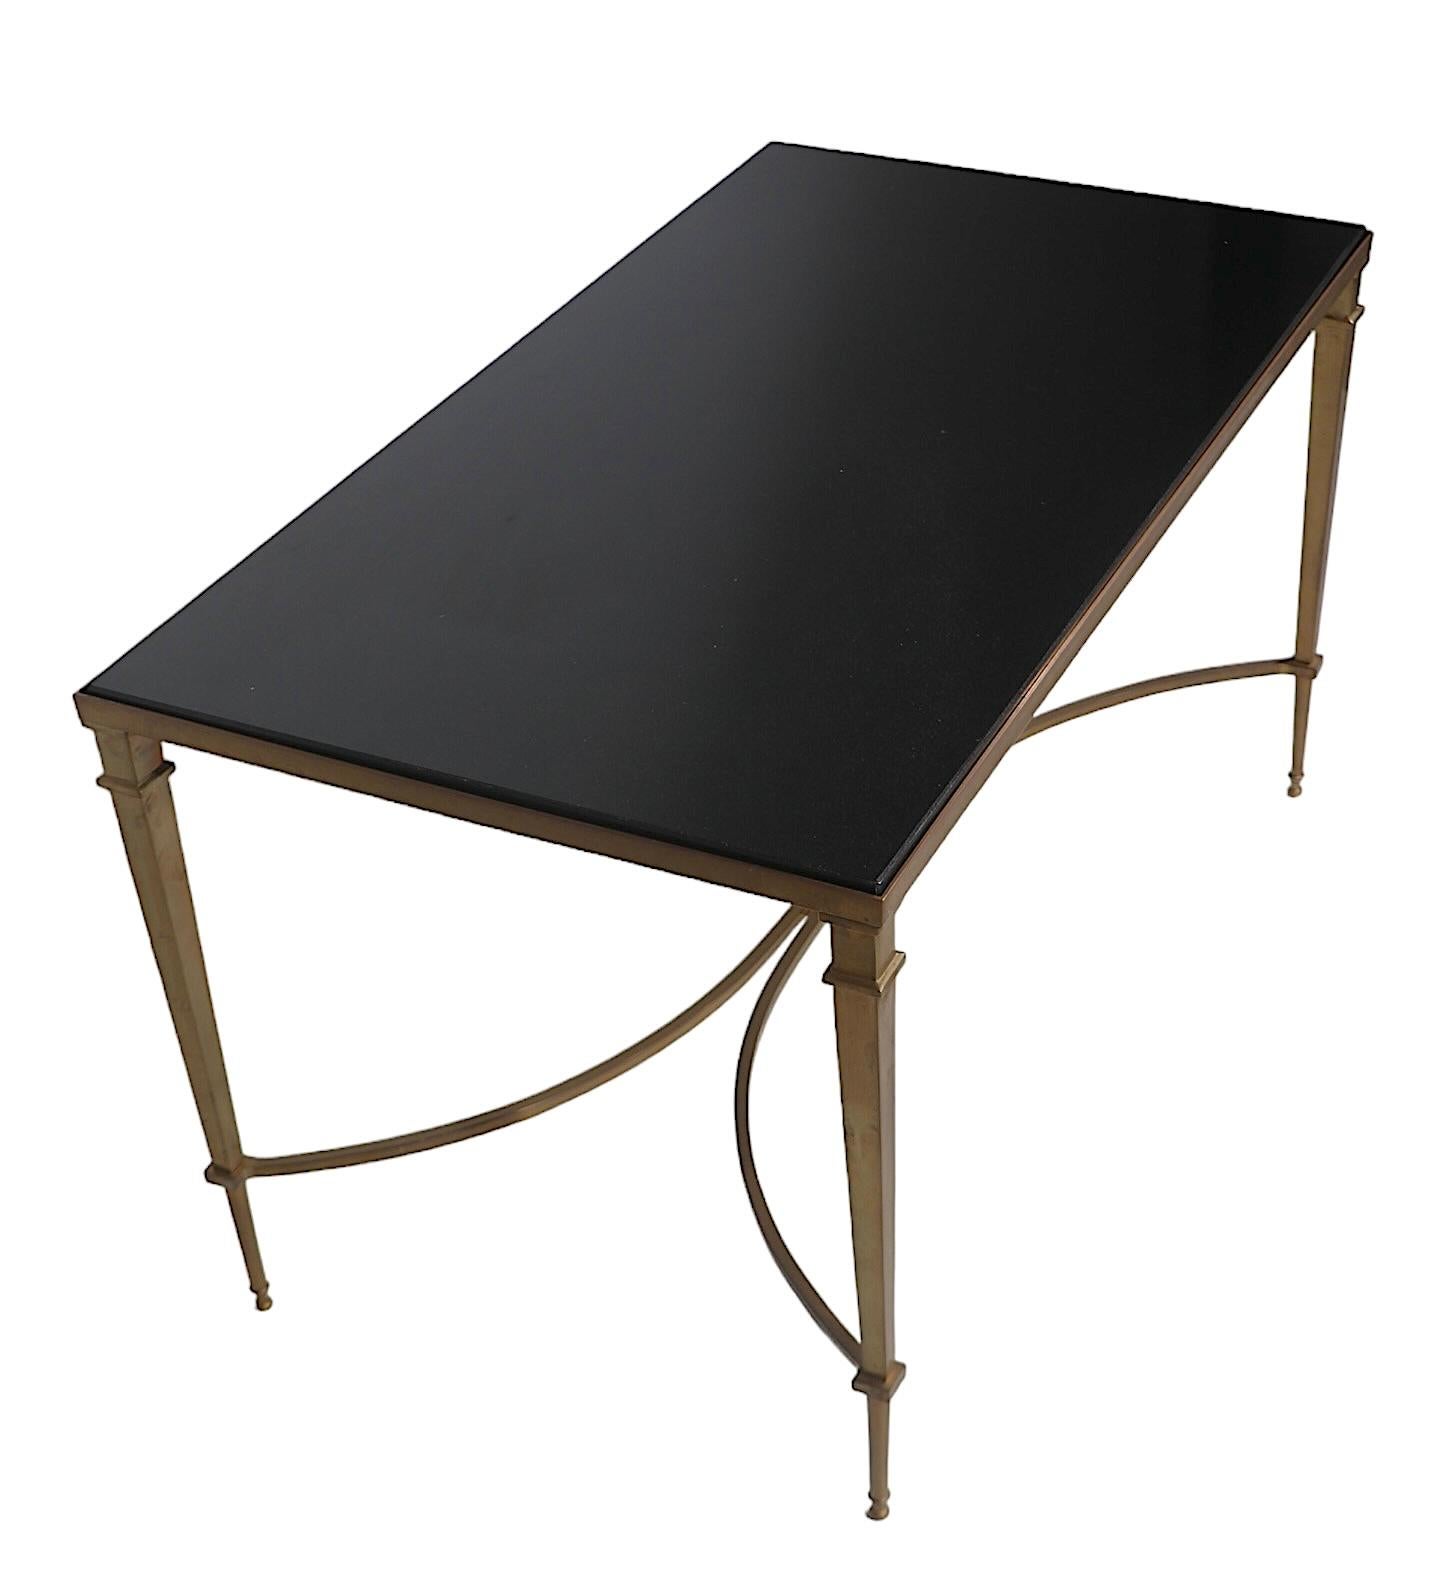 Hollywood Regency Neoclassic Style Brass and Granite Coffee Table c 1960/70's  For Sale 10